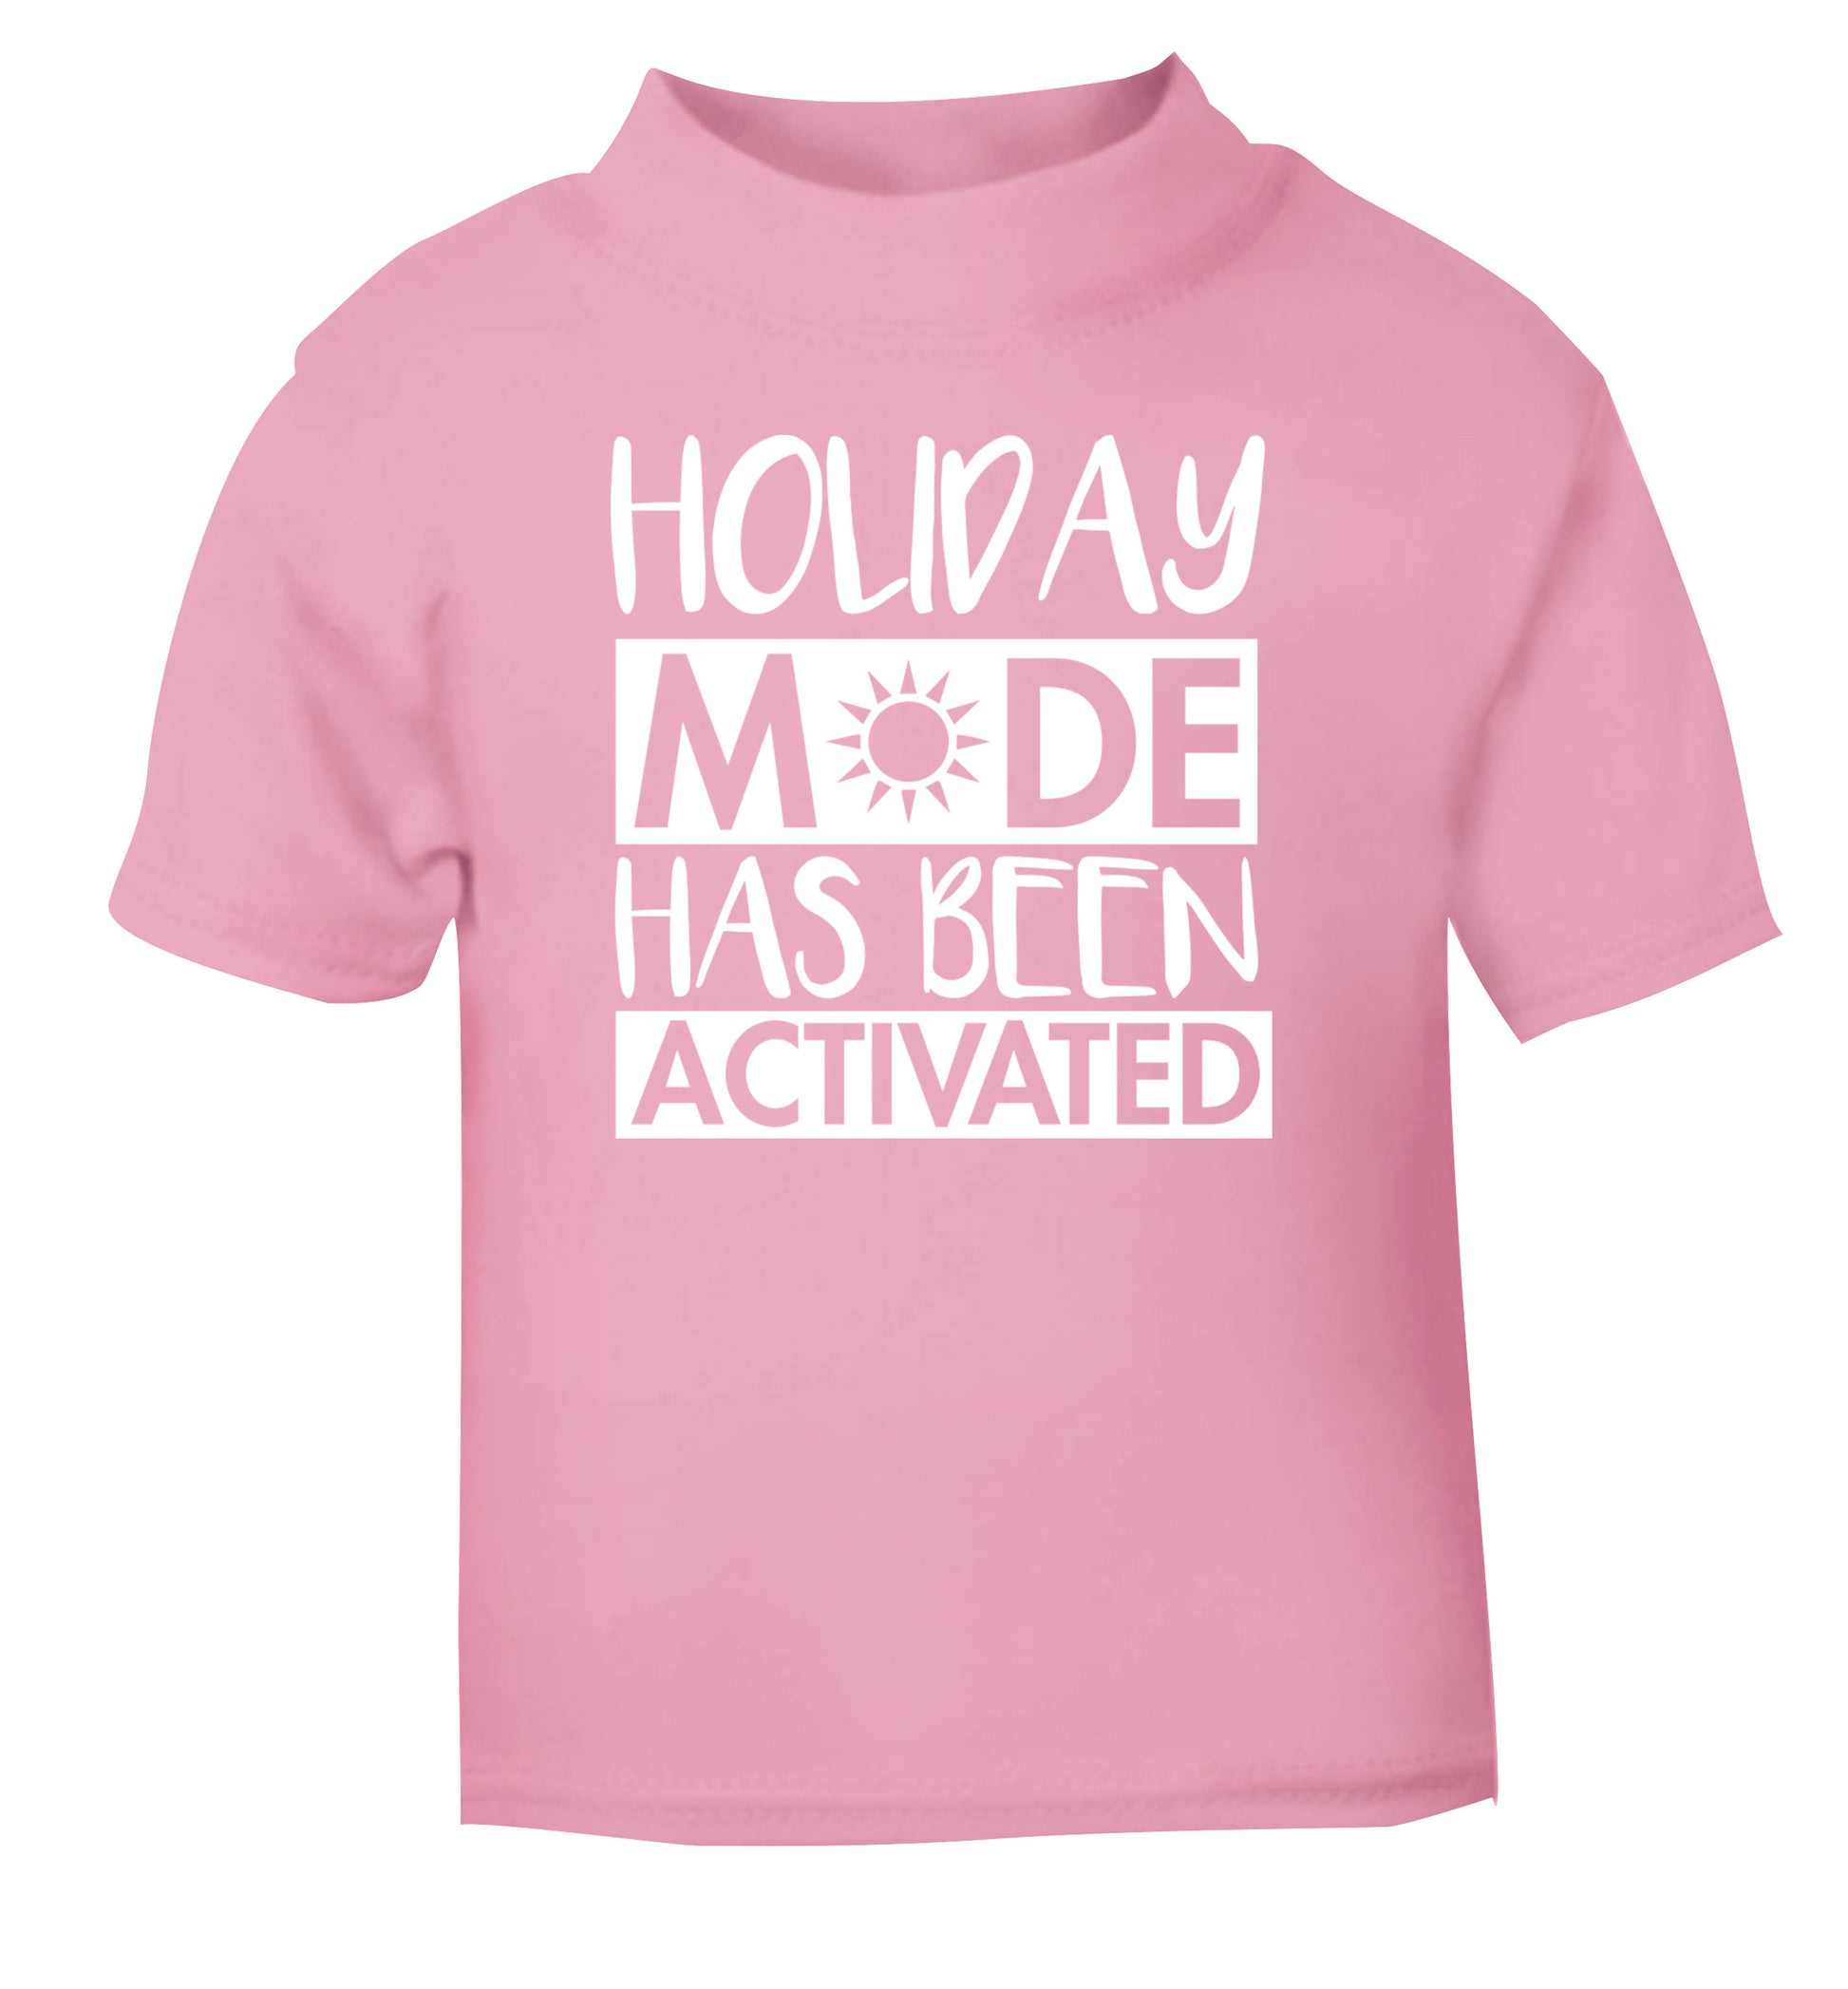 Holiday mode has been activated light pink Baby Toddler Tshirt 2 Years